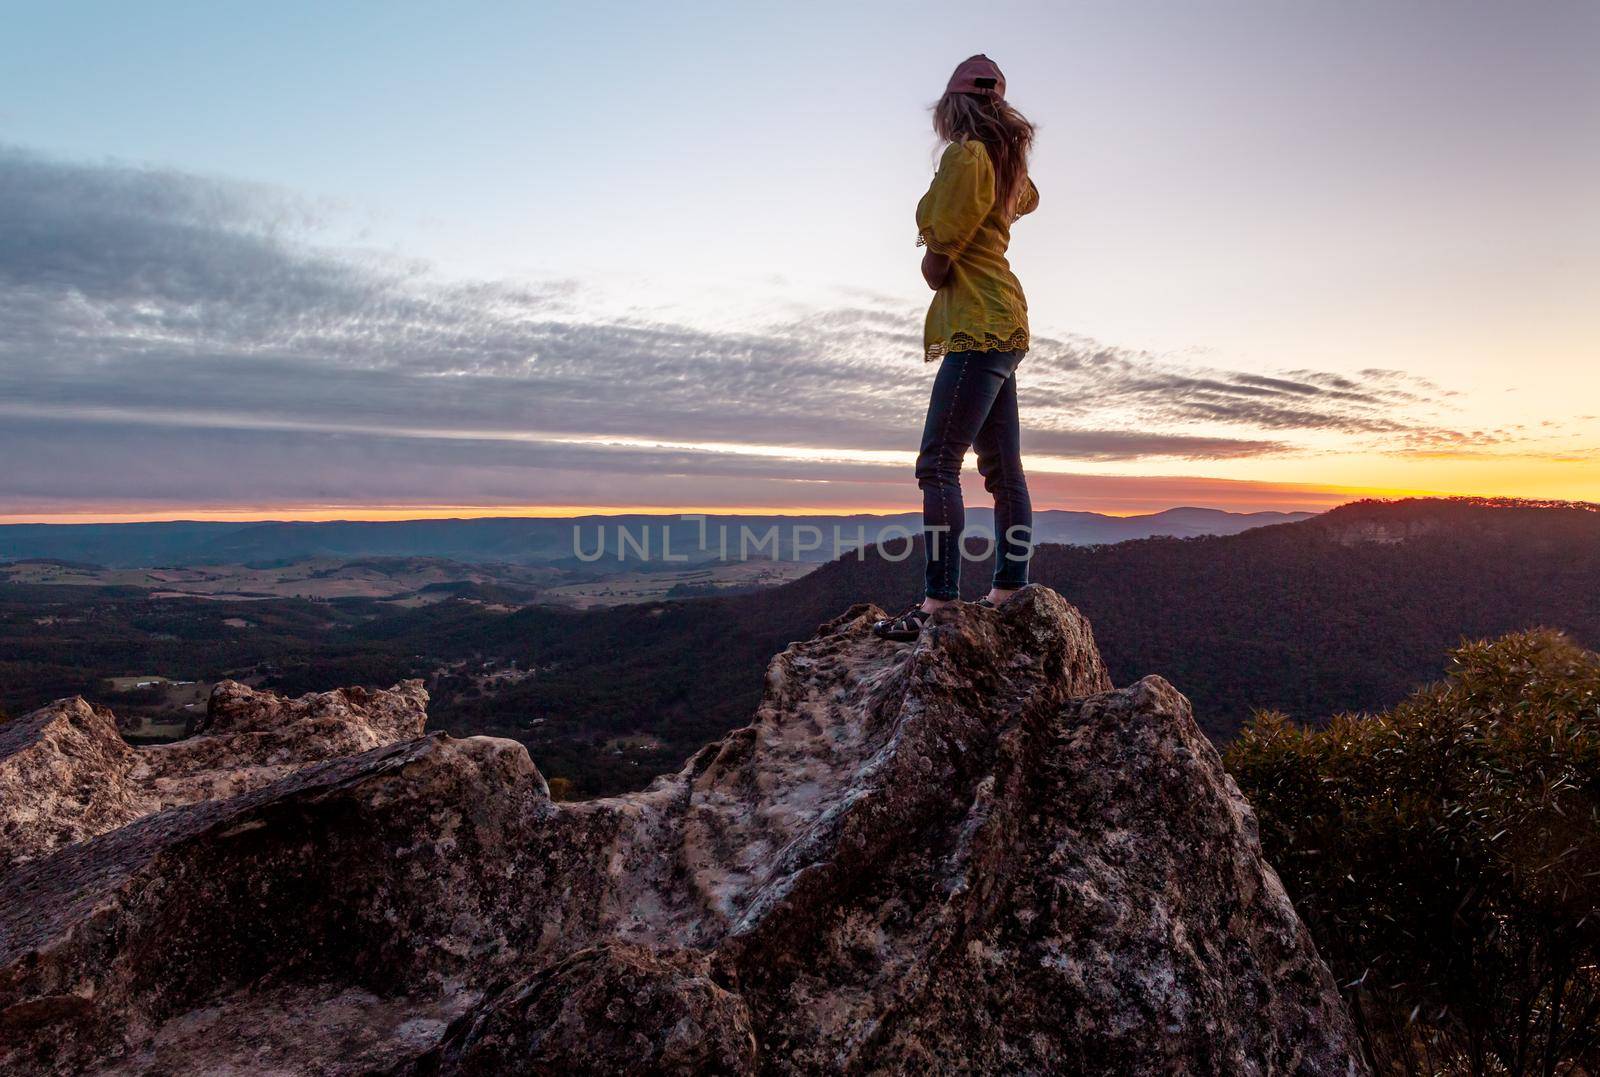 A casually dressed woman stands high on a rock with her hair and top blowing with the brisk wind, her view  overlooks the mountains and valleys and she is watching the sun set.